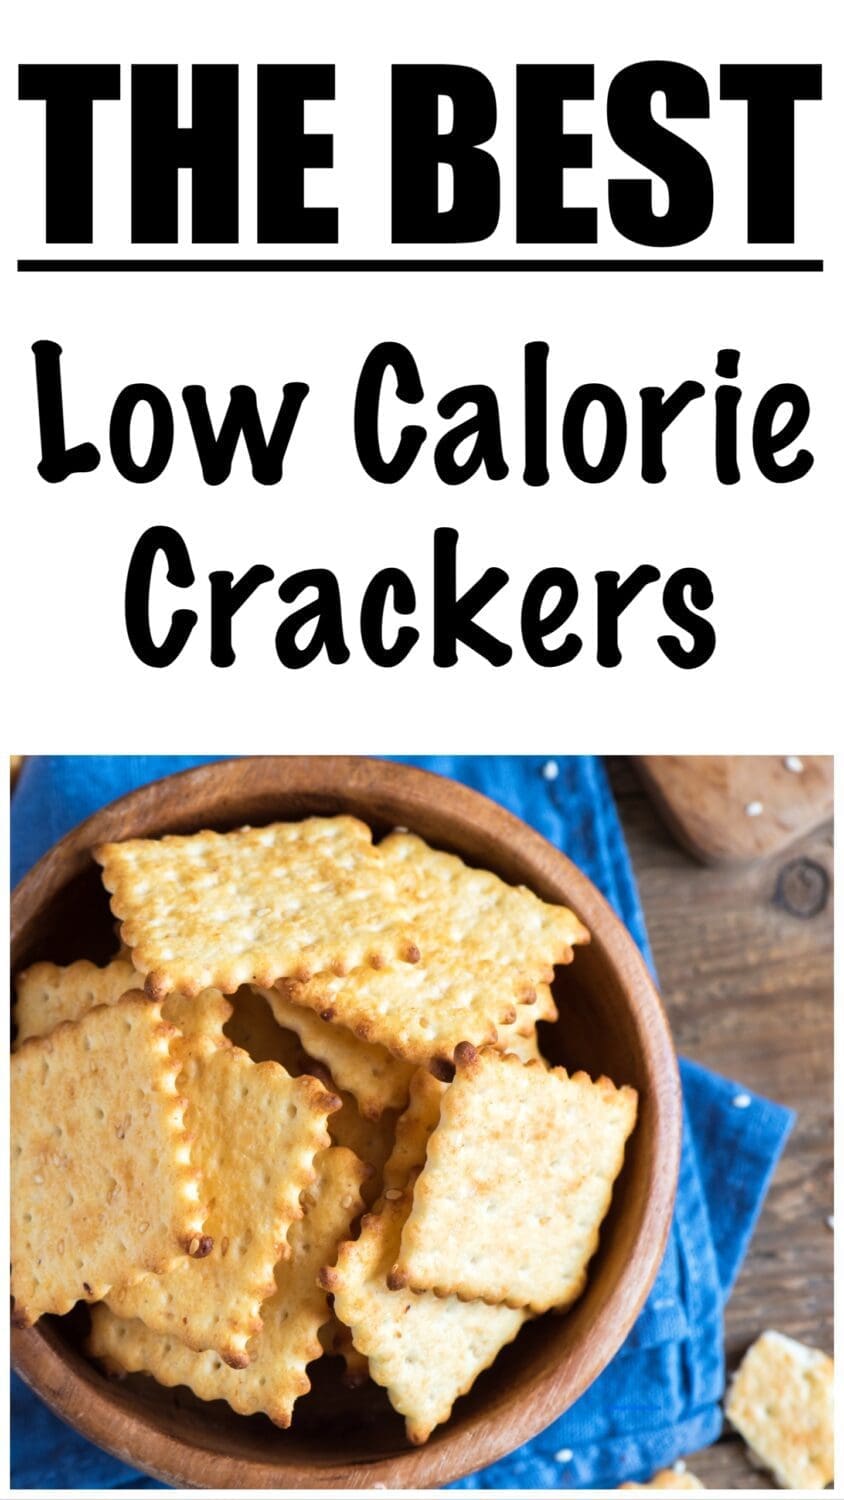 Best and Worst Cracker Choices: Calories in Favorites